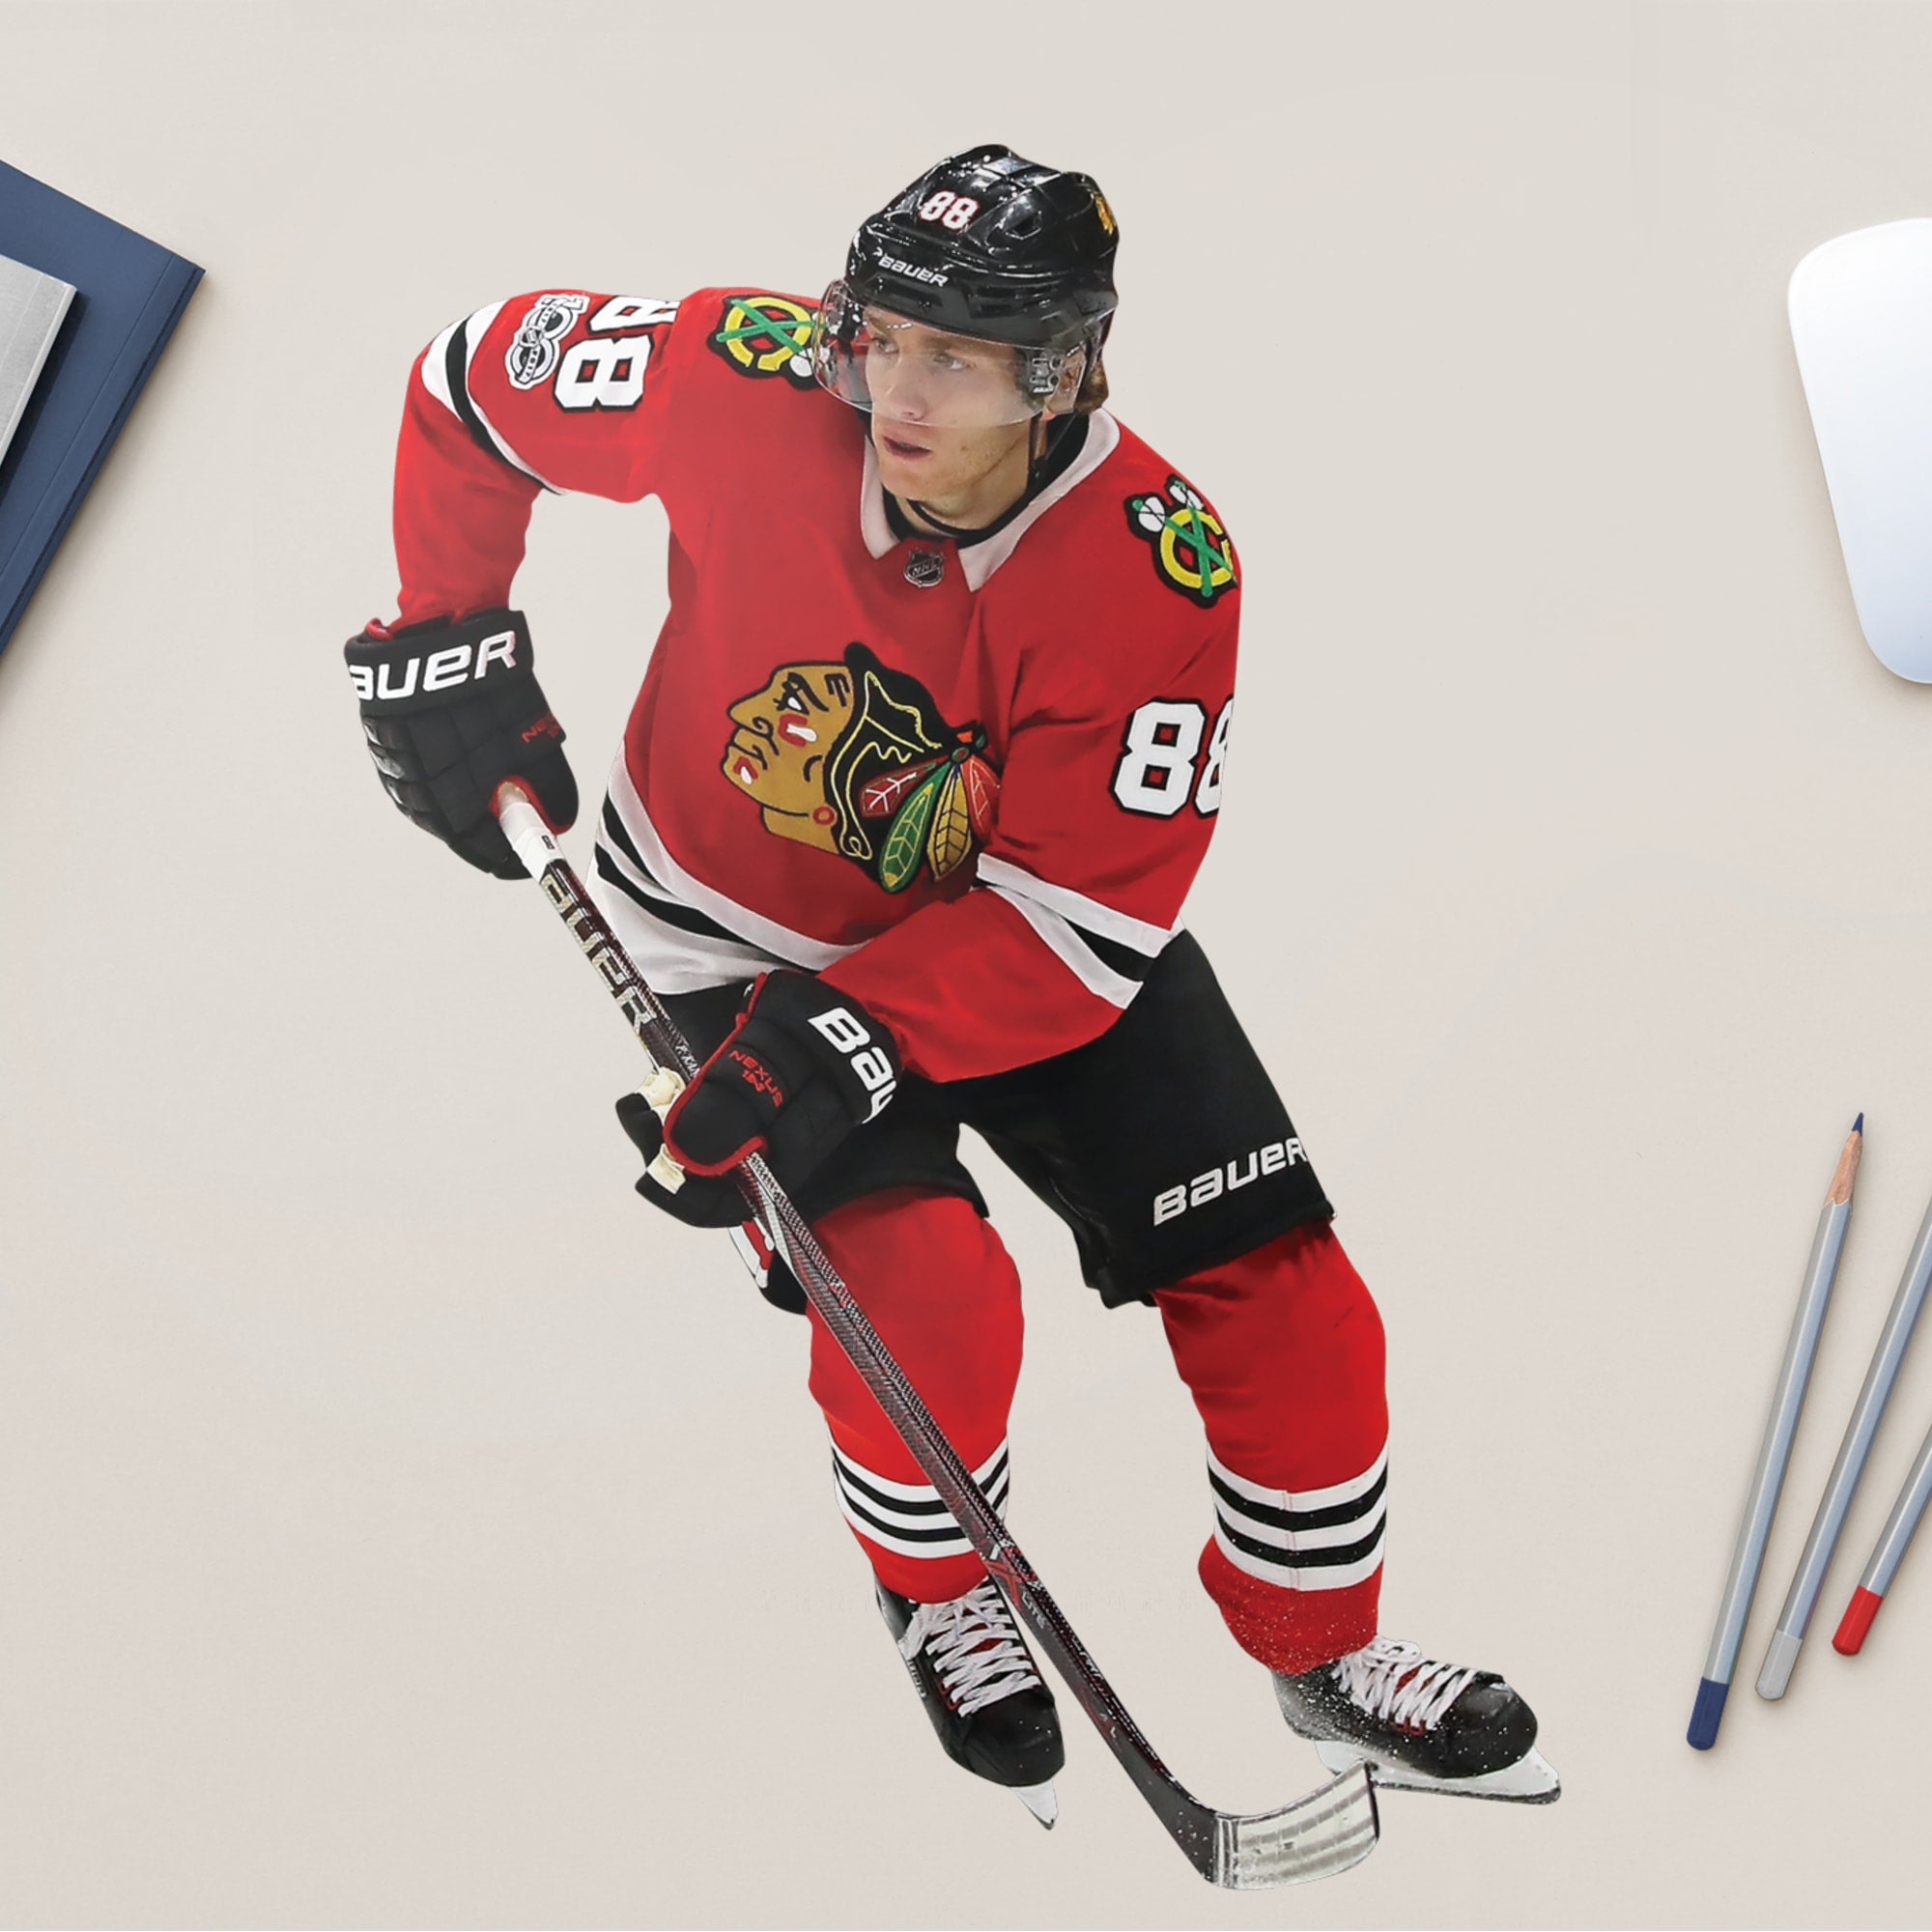 Patrick Kane for Chicago Blackhawks - Officially Licensed NHL Removable Wall Decal 12.0"W x 17.0"H by Fathead | Vinyl